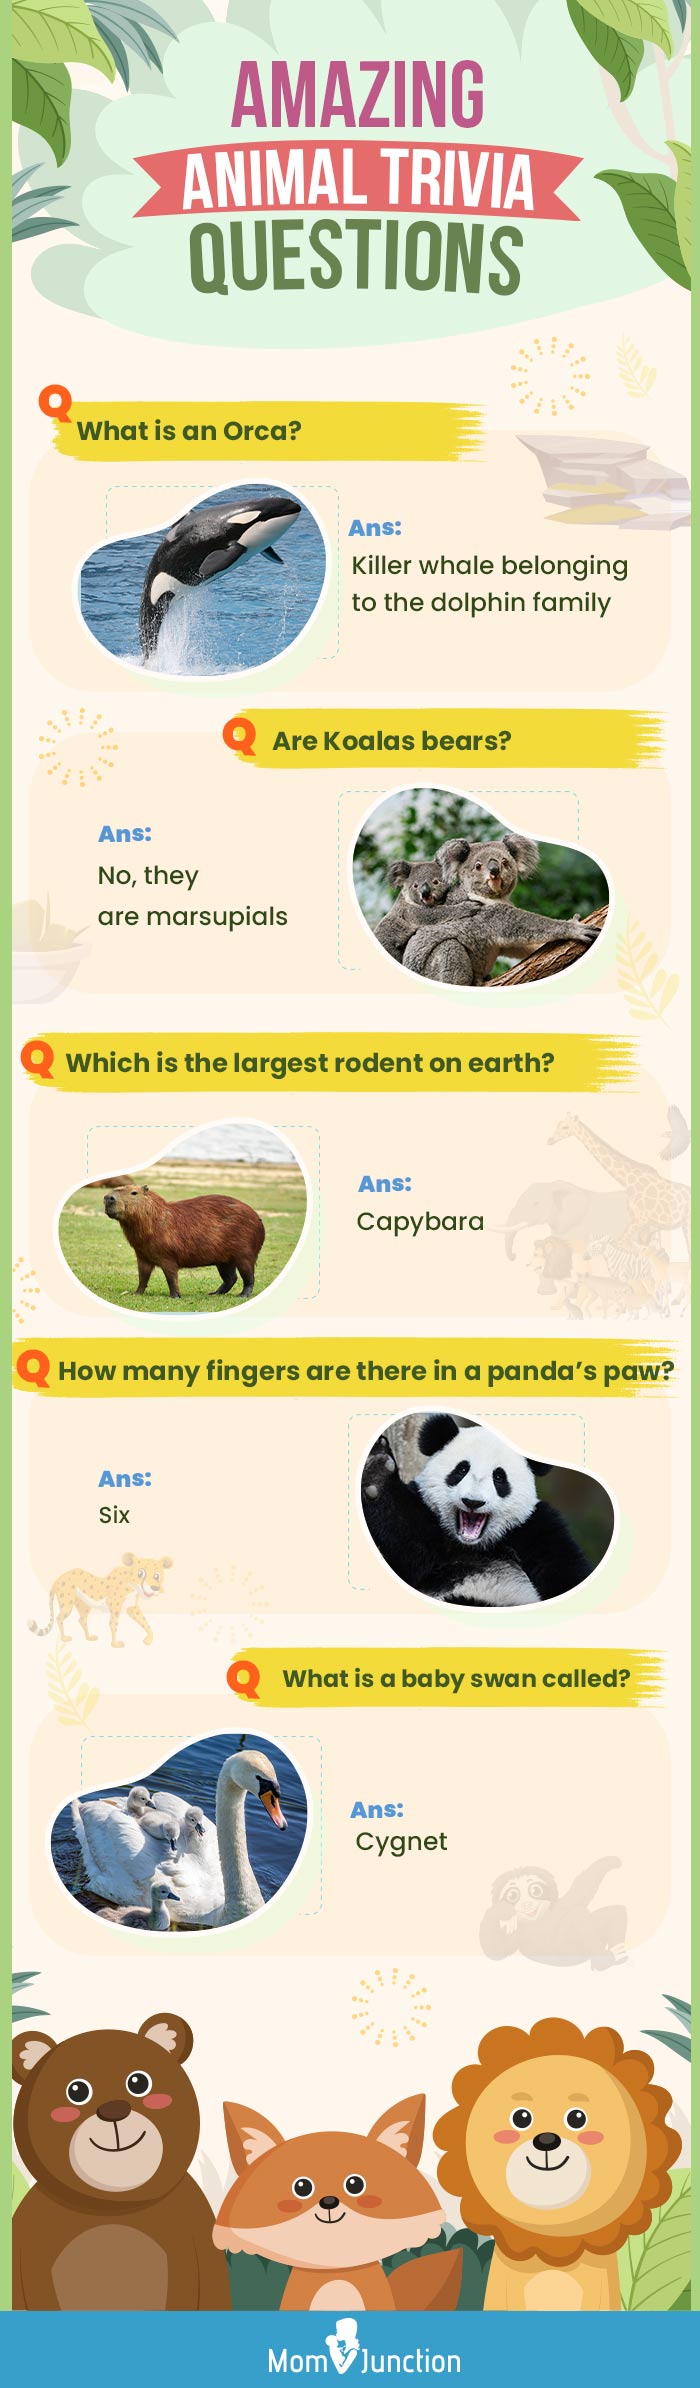 animals trivia questions for kids (infographic)